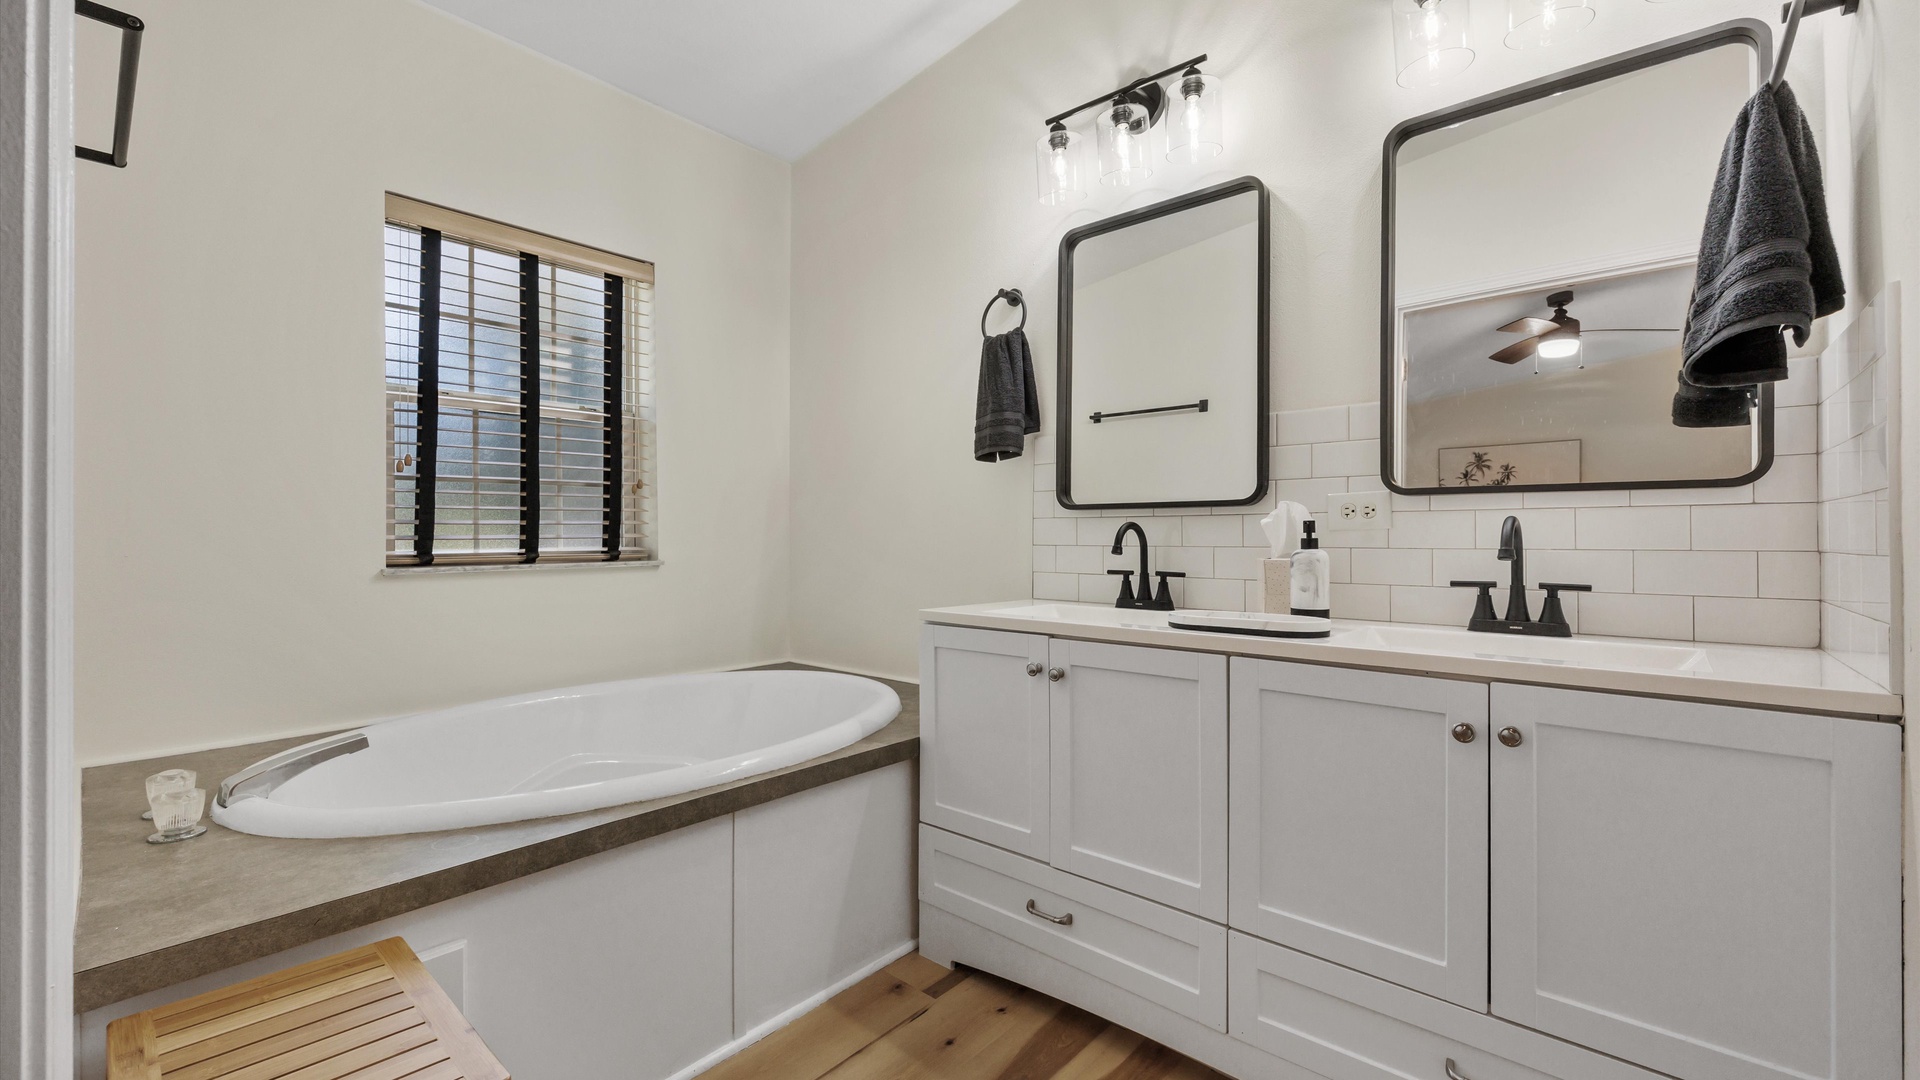 The master ensuite offers a double vanity, walk-in shower, & soaking tub